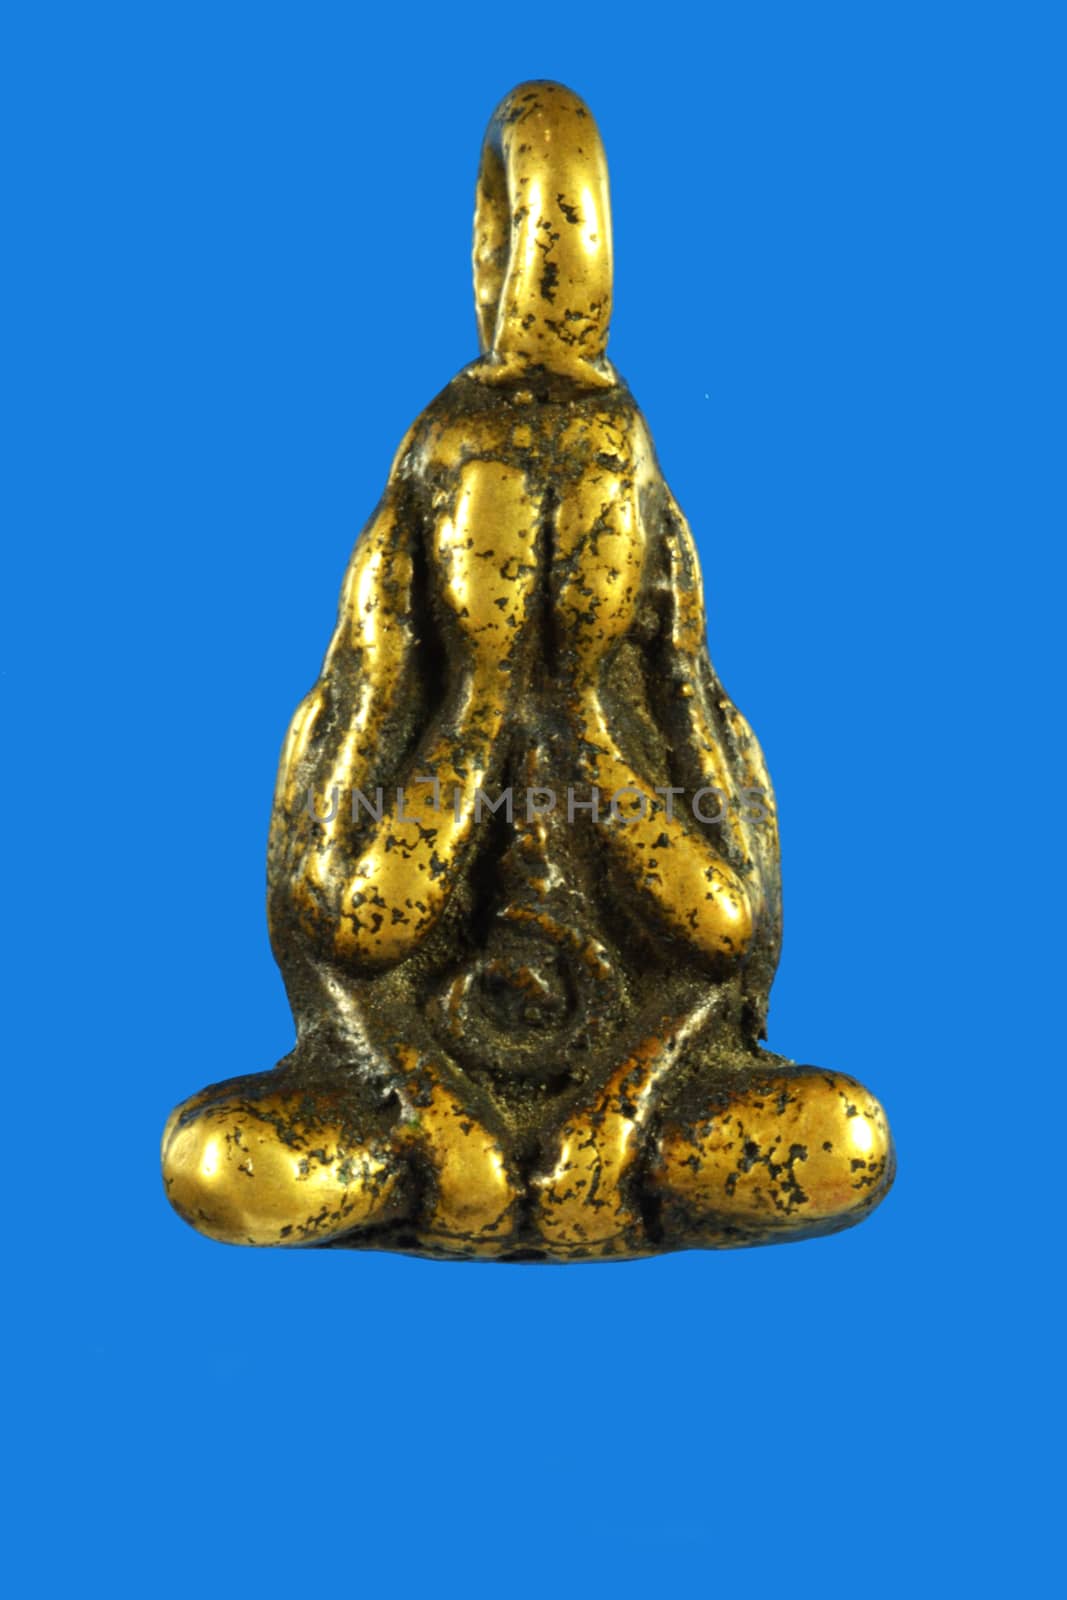 See No Evil Buddha Gold Thai Amulet on blue background, Consecrate By luang phor yui wat bang kapi